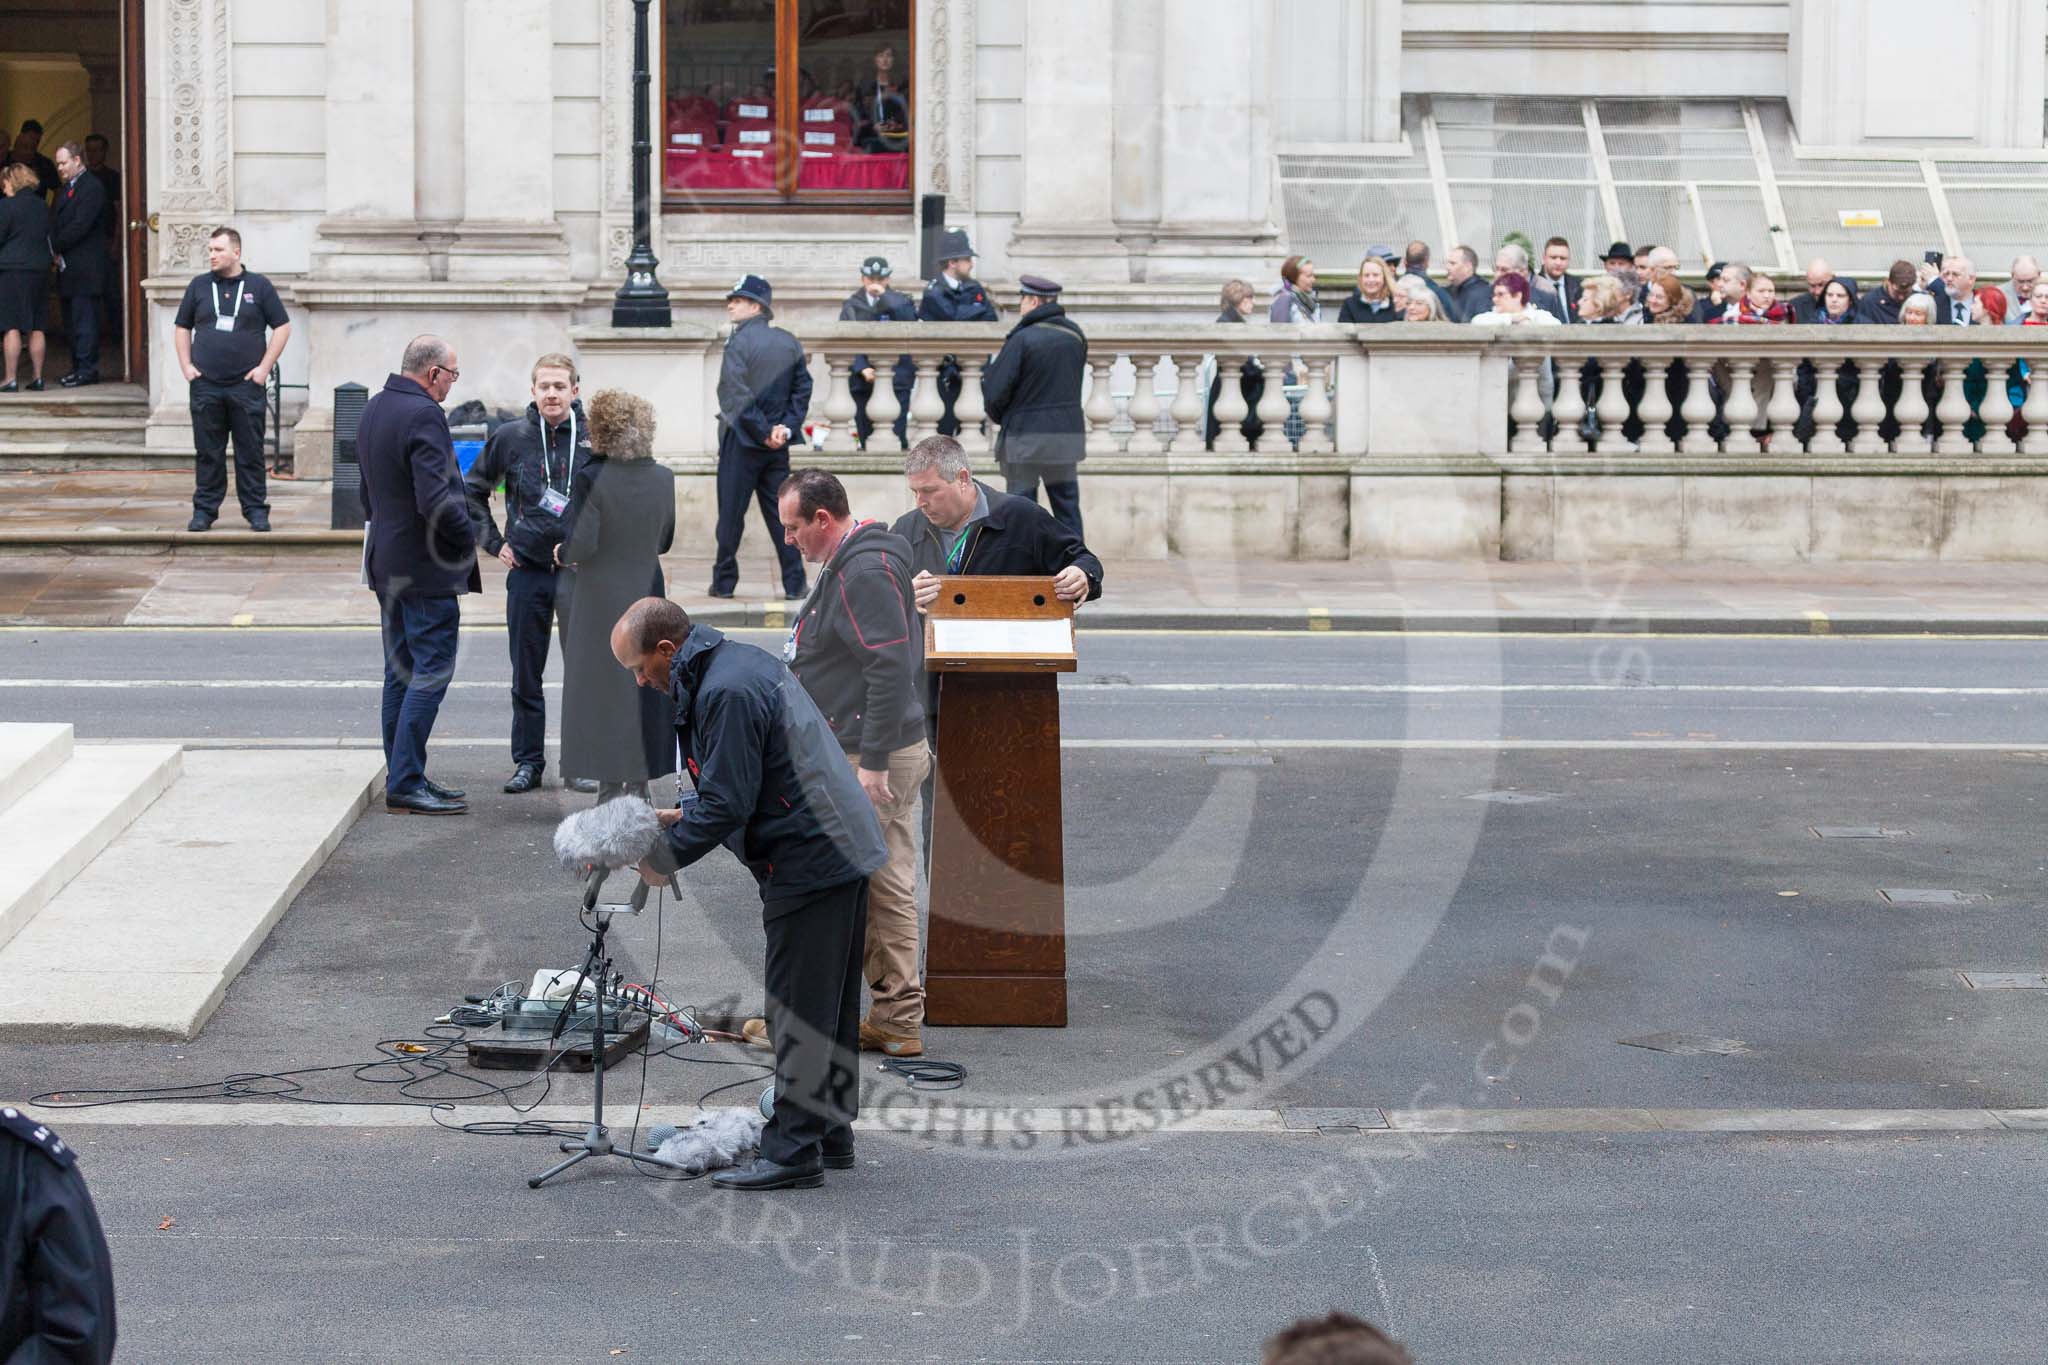 Remembrance Sunday at the Cenotaph 2015: Preparations for the service at the Cenotaph. Image #4, 08 November 2015 08:53 Whitehall, London, UK